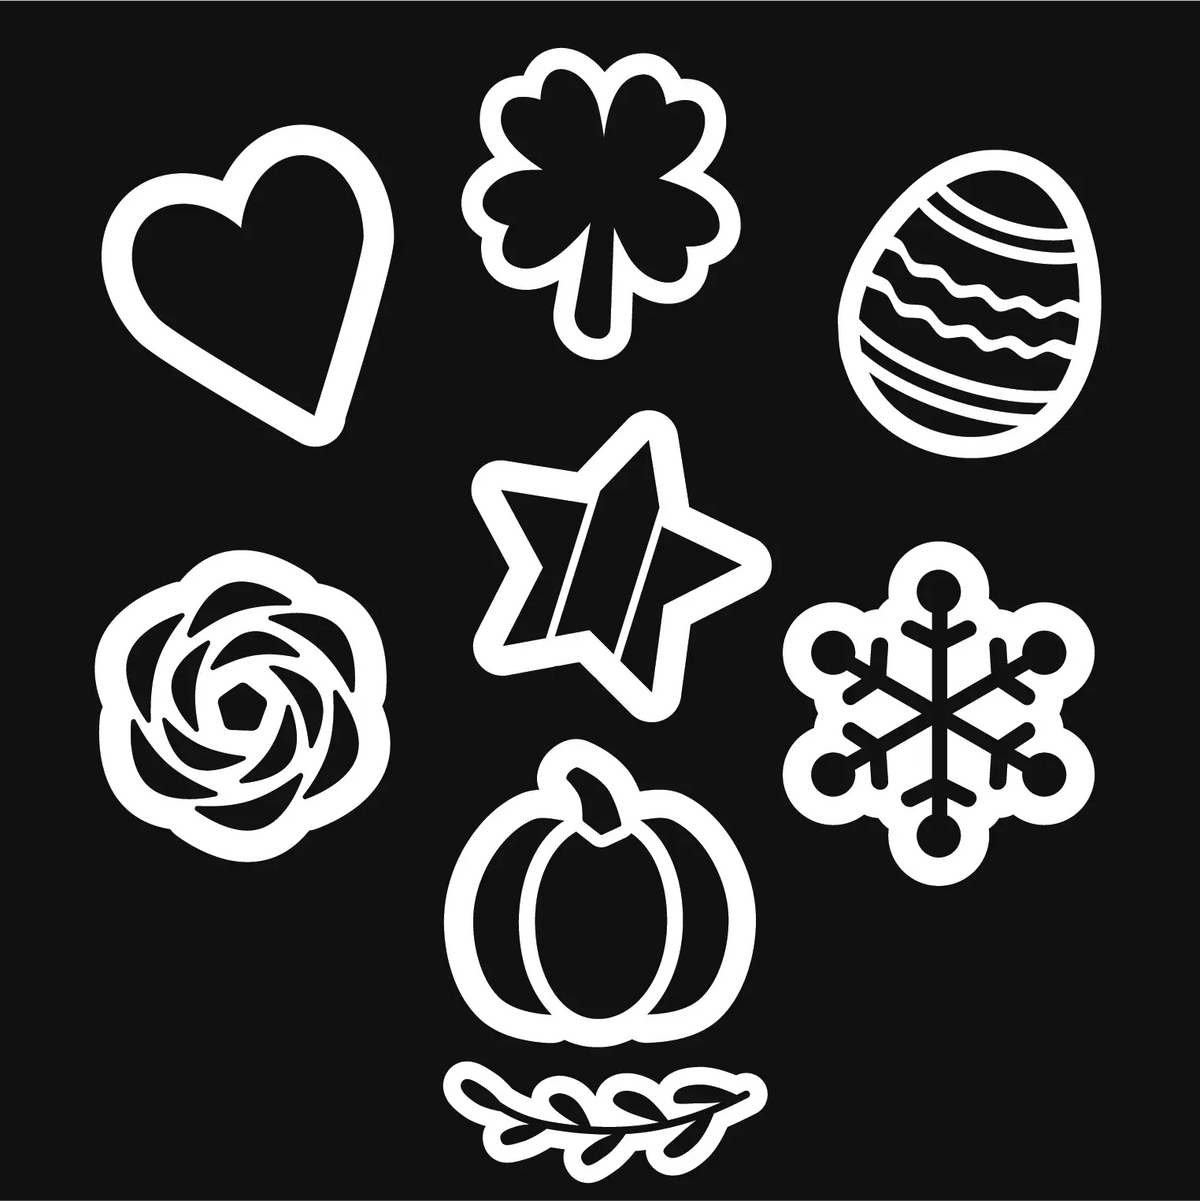 Plata Chalkboards Magnetic Holiday Stencils for chalkboards and whiteboards, includes heart, 4 leaf clover, Easter egg, rose, patriotic star, pumpkin, snowflake and laurel stencils for easy chalk art